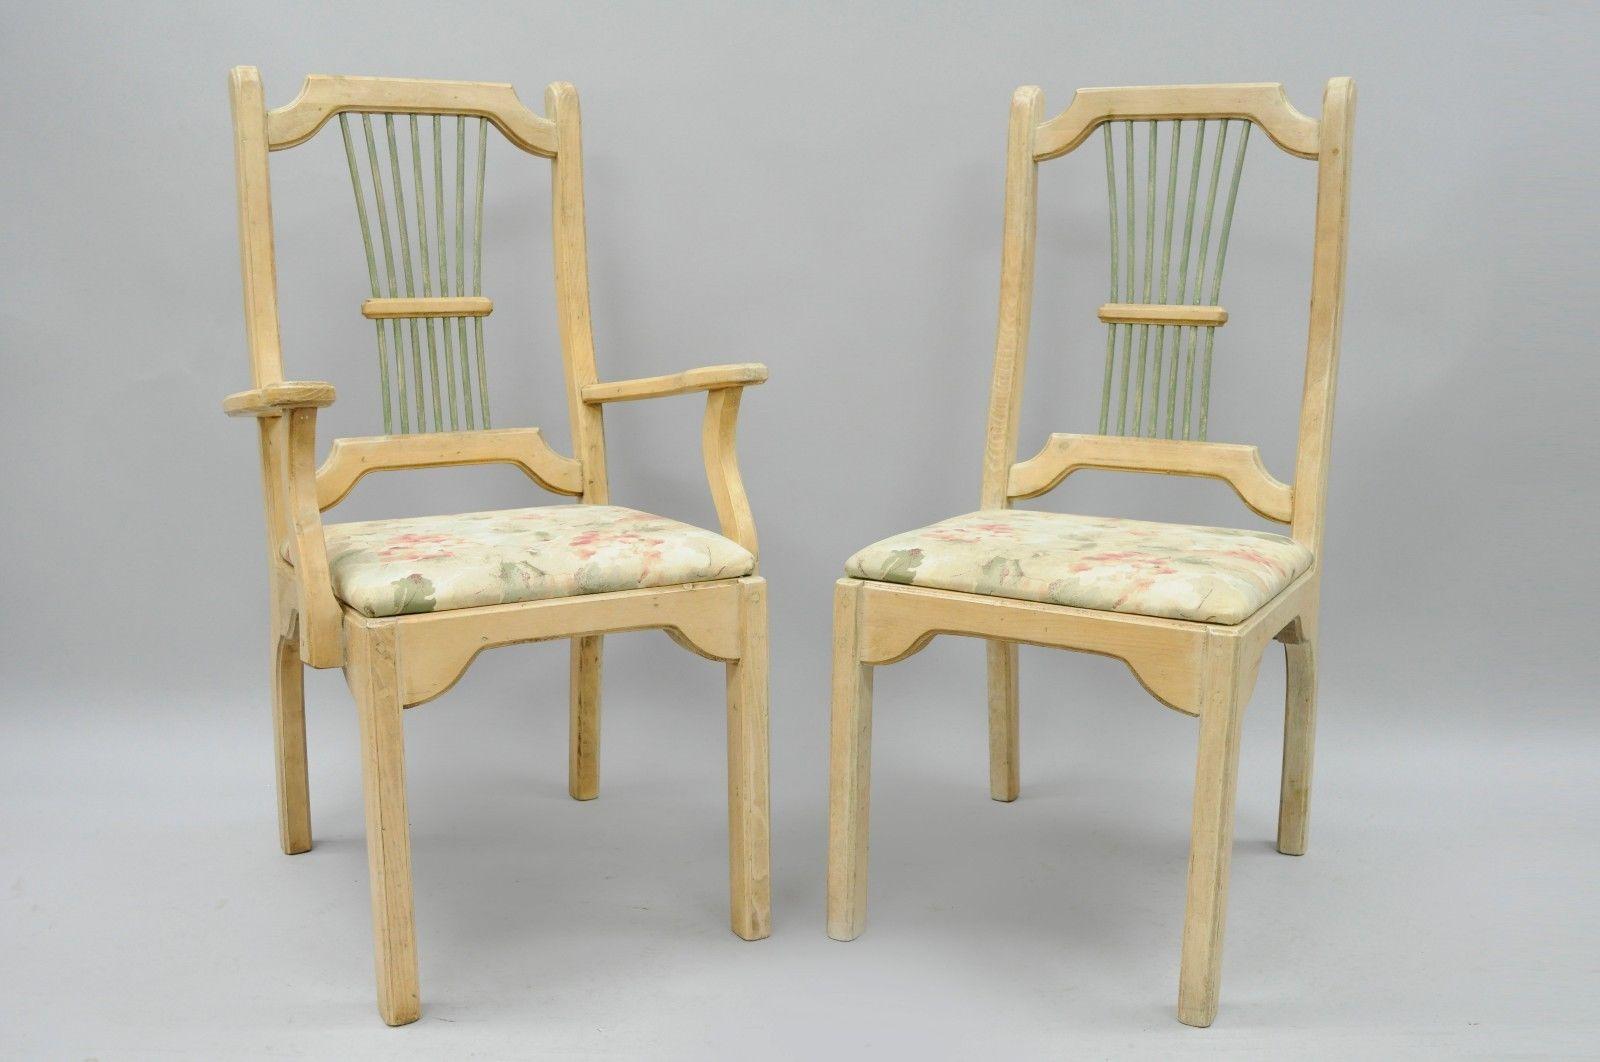 Set of six Charming Vintage Rustic French Country Style Solid Pine Spindle Back Dining Chairs. Item features two armchairs, four side chairs, unique exposed dowel joints throughout, solid wood construction, knotty wood grain, green painted spindles,